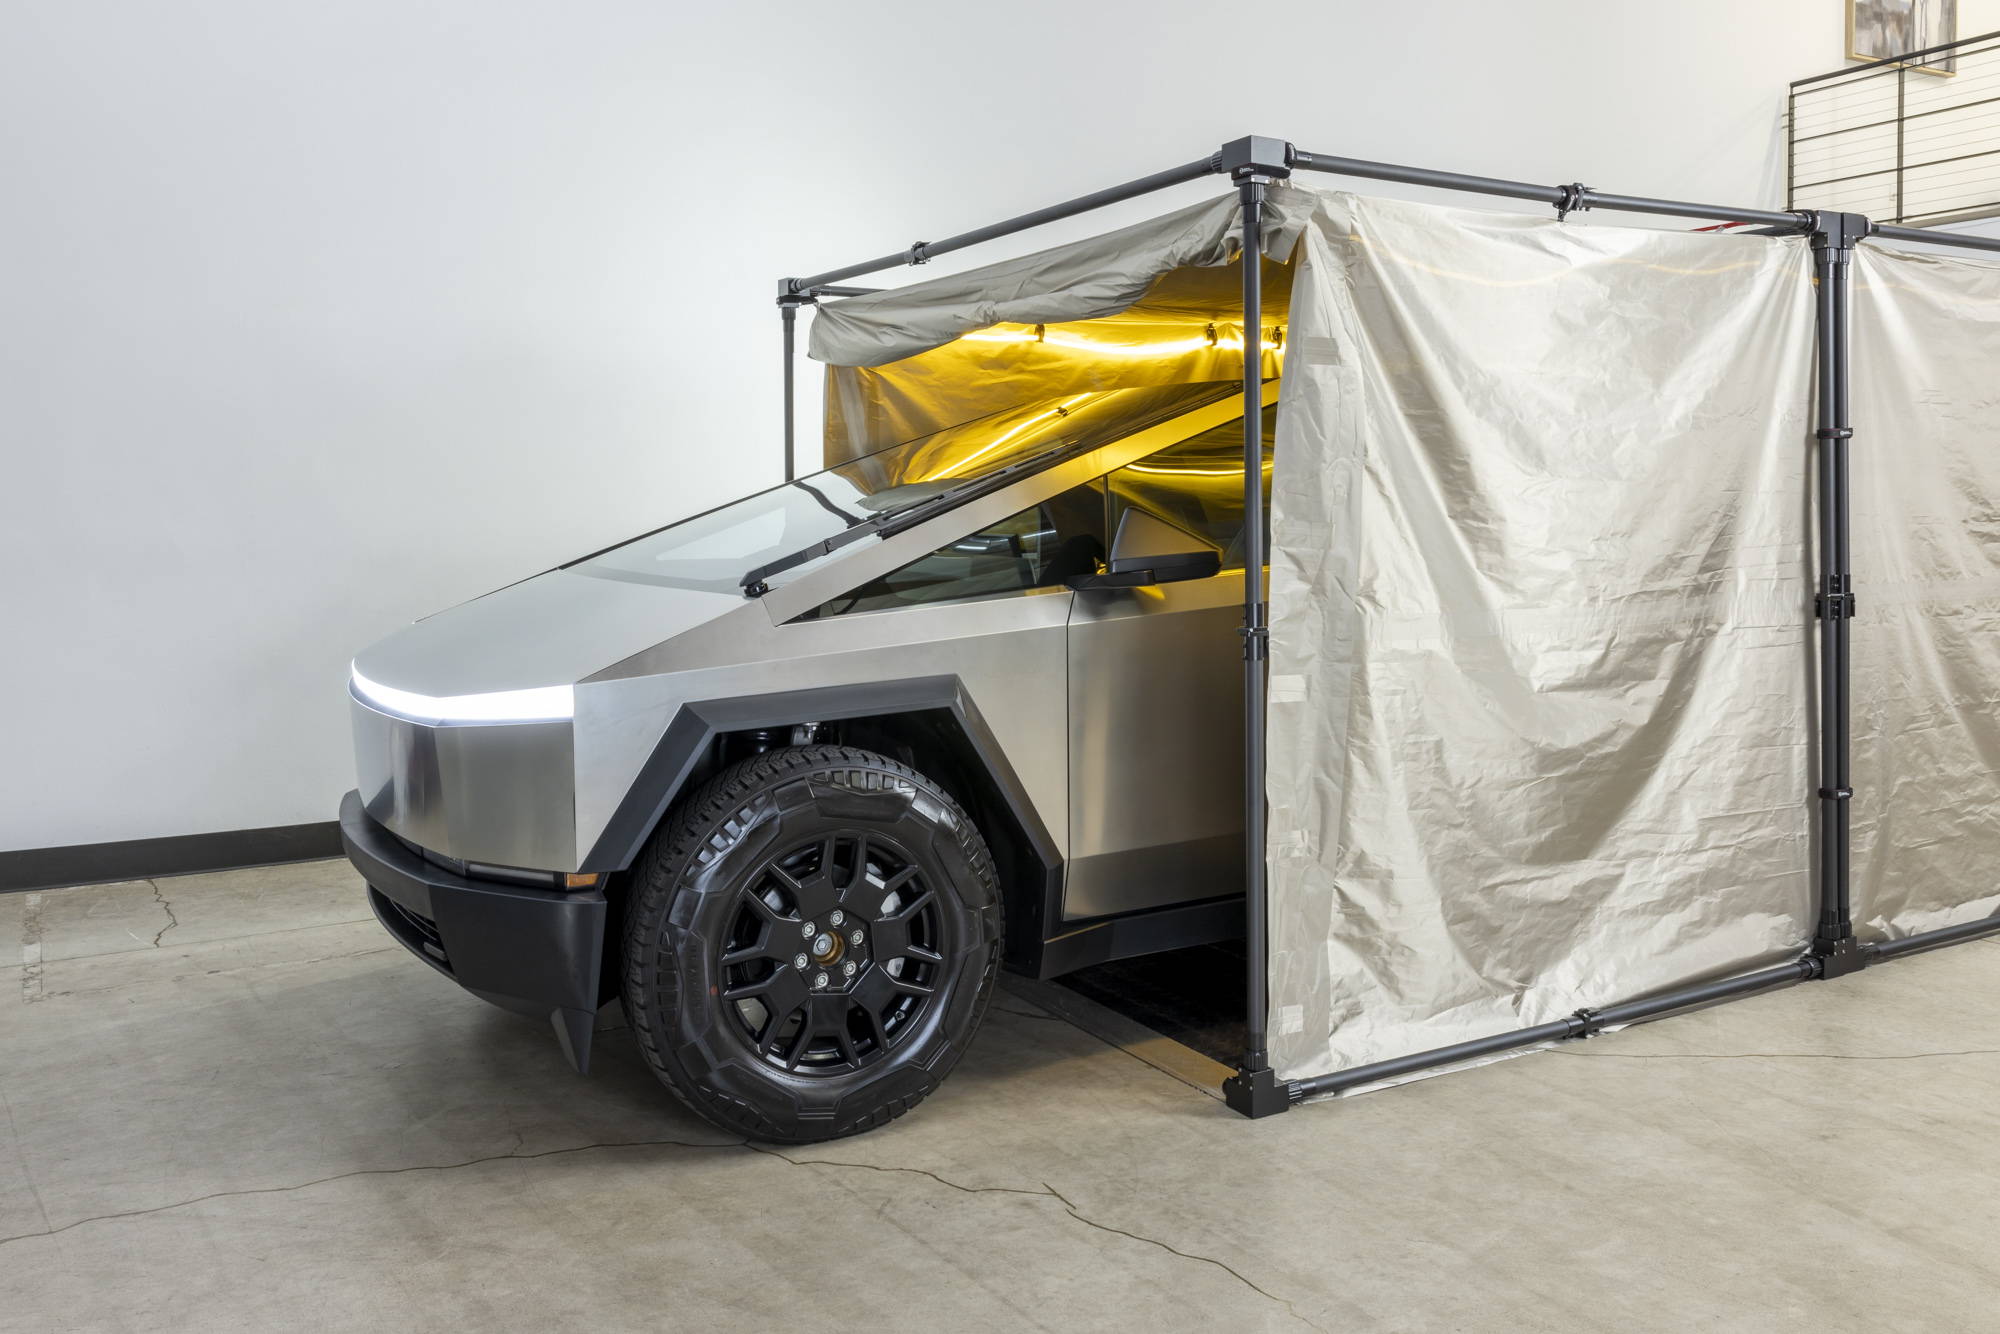 Mission Darkness CYBERCYLENT Faraday Car Cover is the ultimate doomsday cover for preserving doomsday vehicles